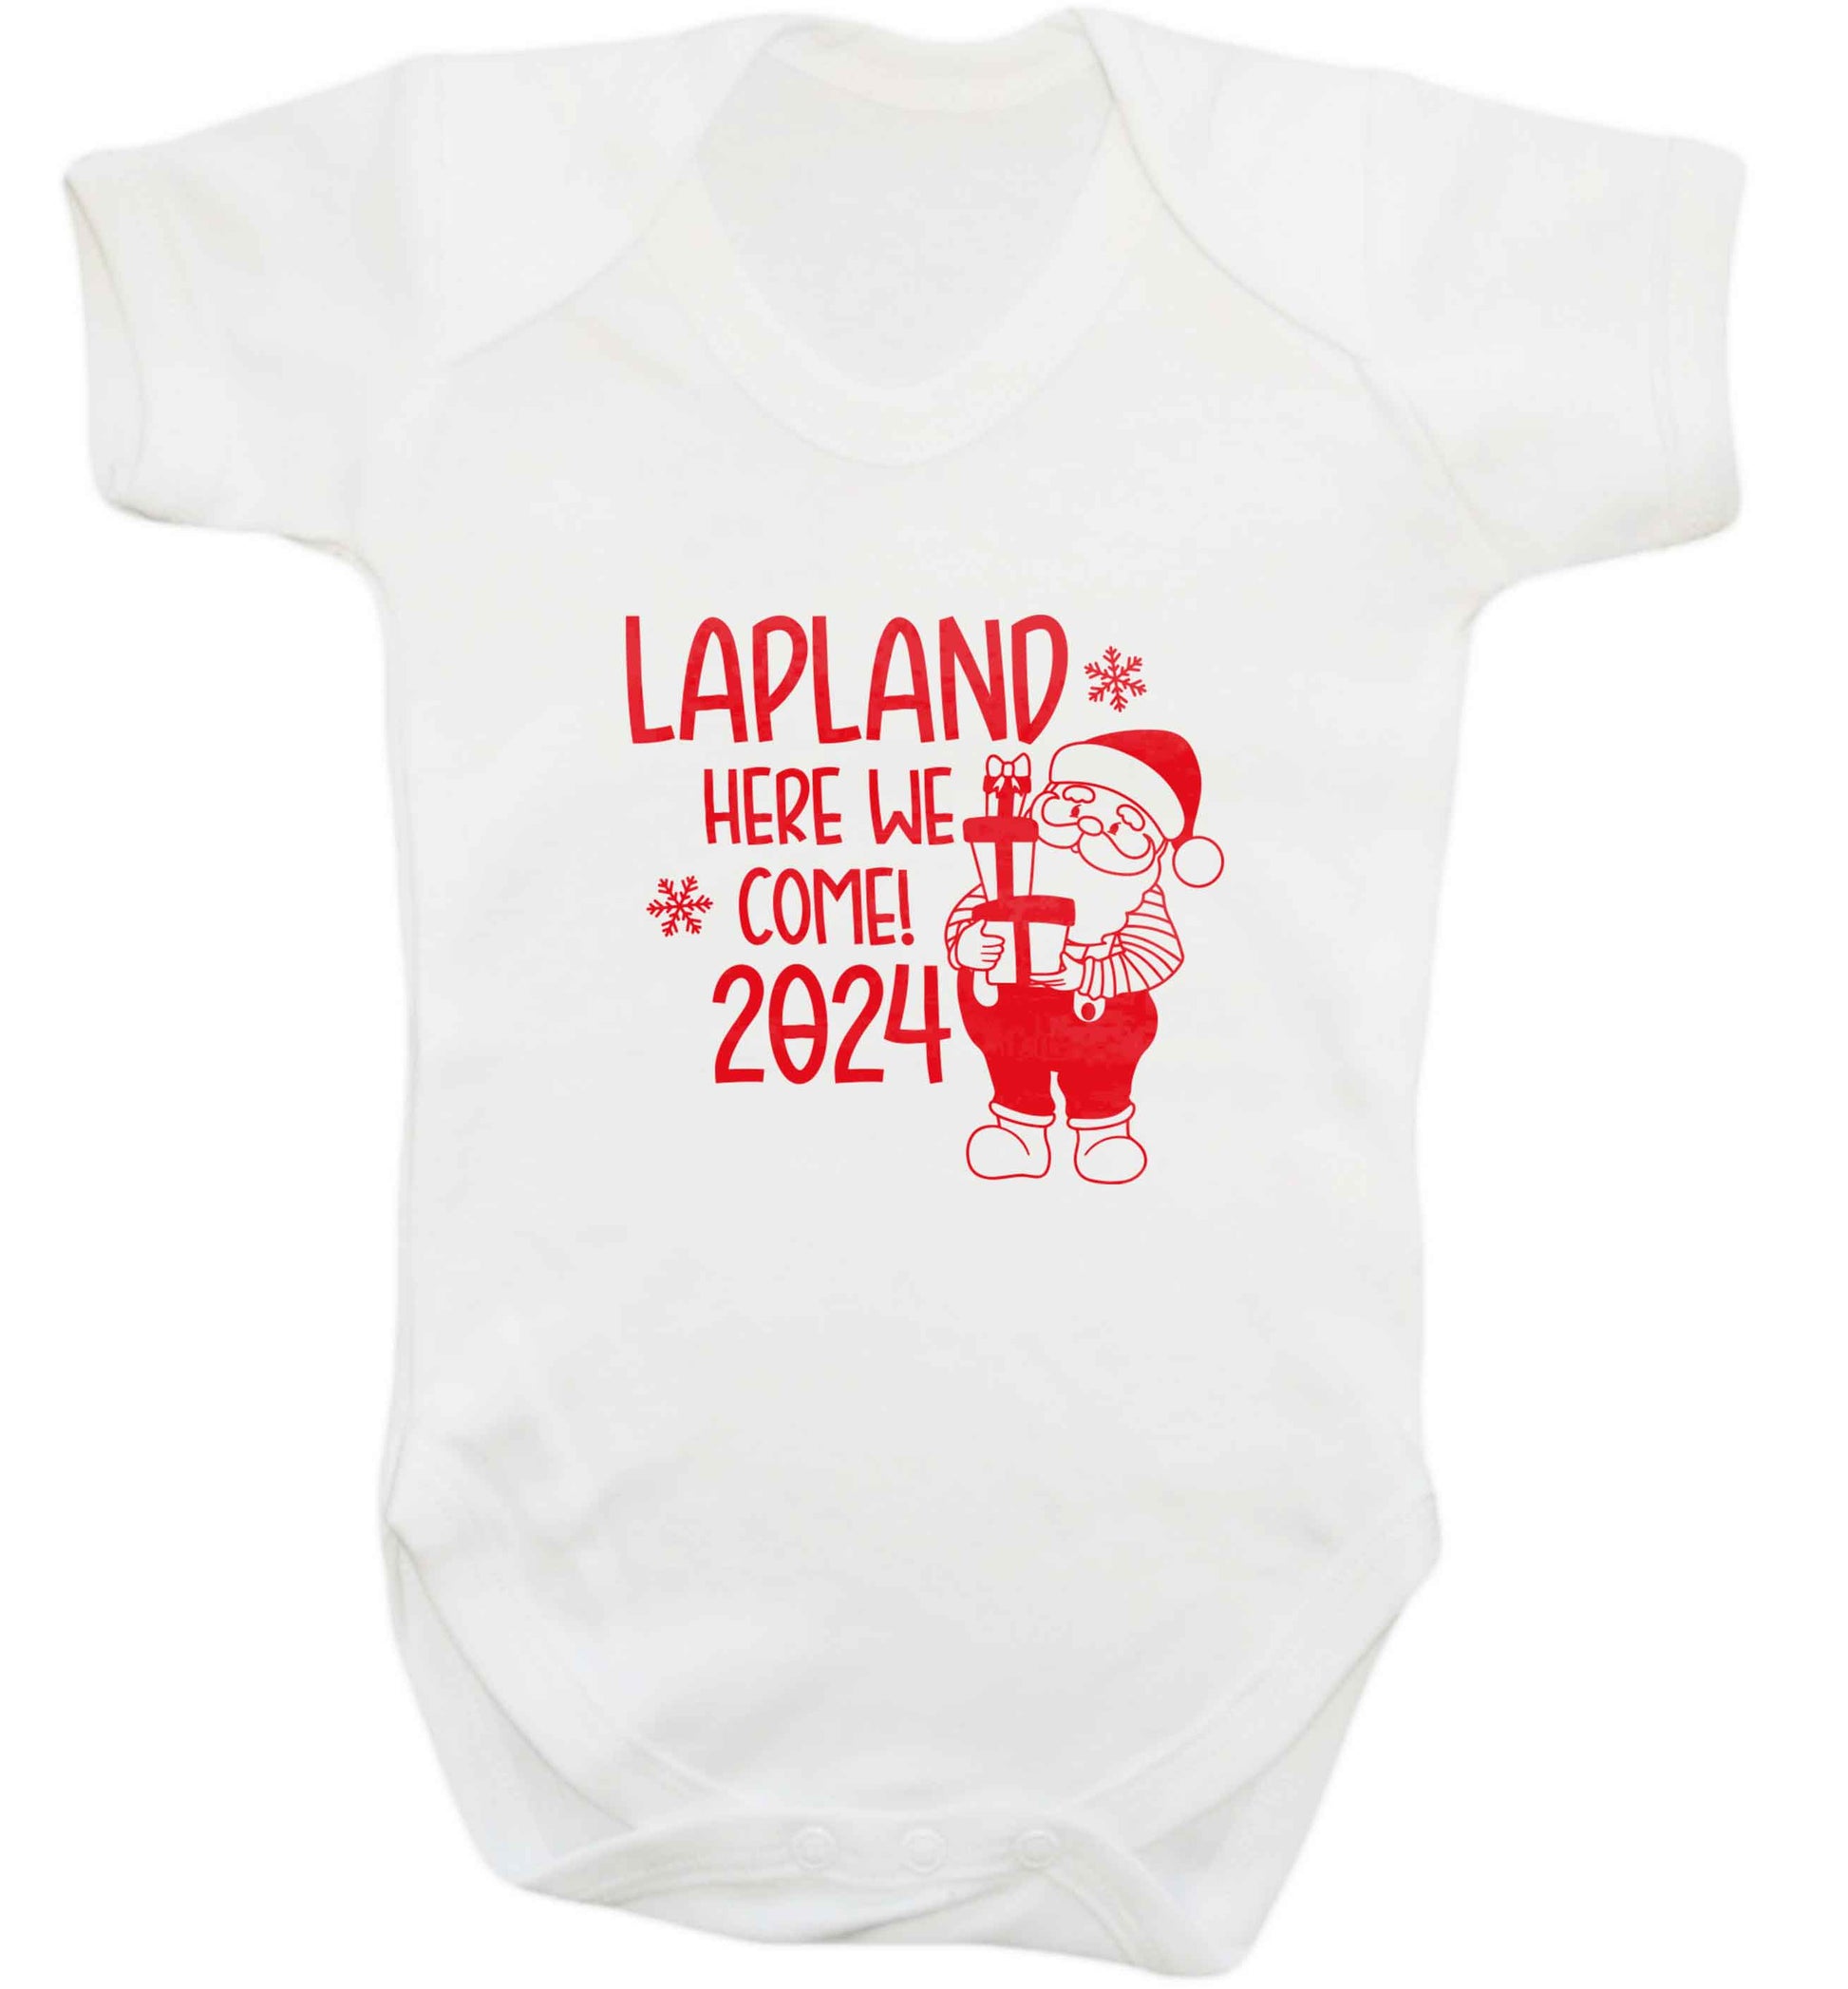 Lapland here we come baby vest white 18-24 months